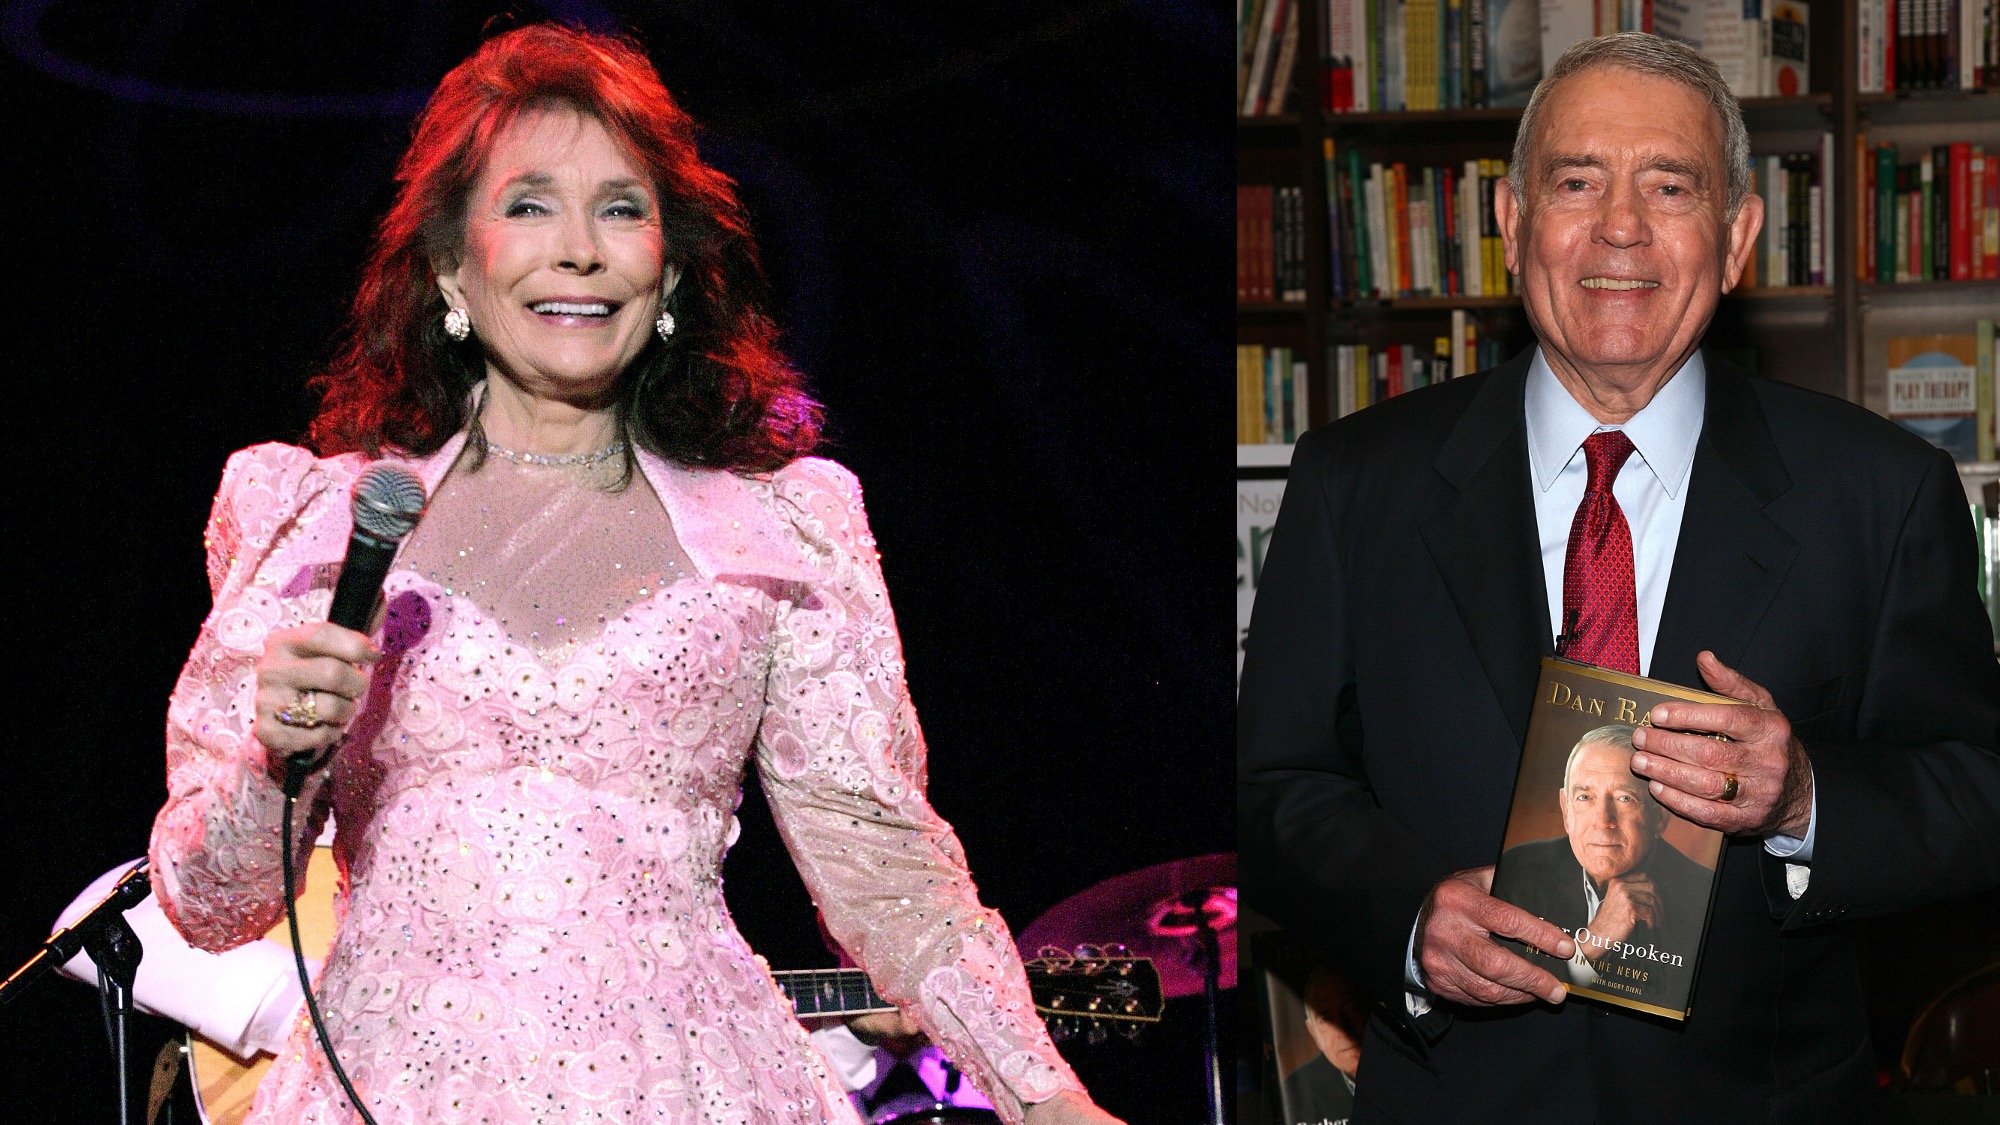 (L) Loretta Lynn performs at Adrian Phillips Ballroom July 31, 2004. (R) Dan Rather promotes "Rather Outspoken: My Life In The News" at Barnes & Noble 82nd Street on May 2, 2012.